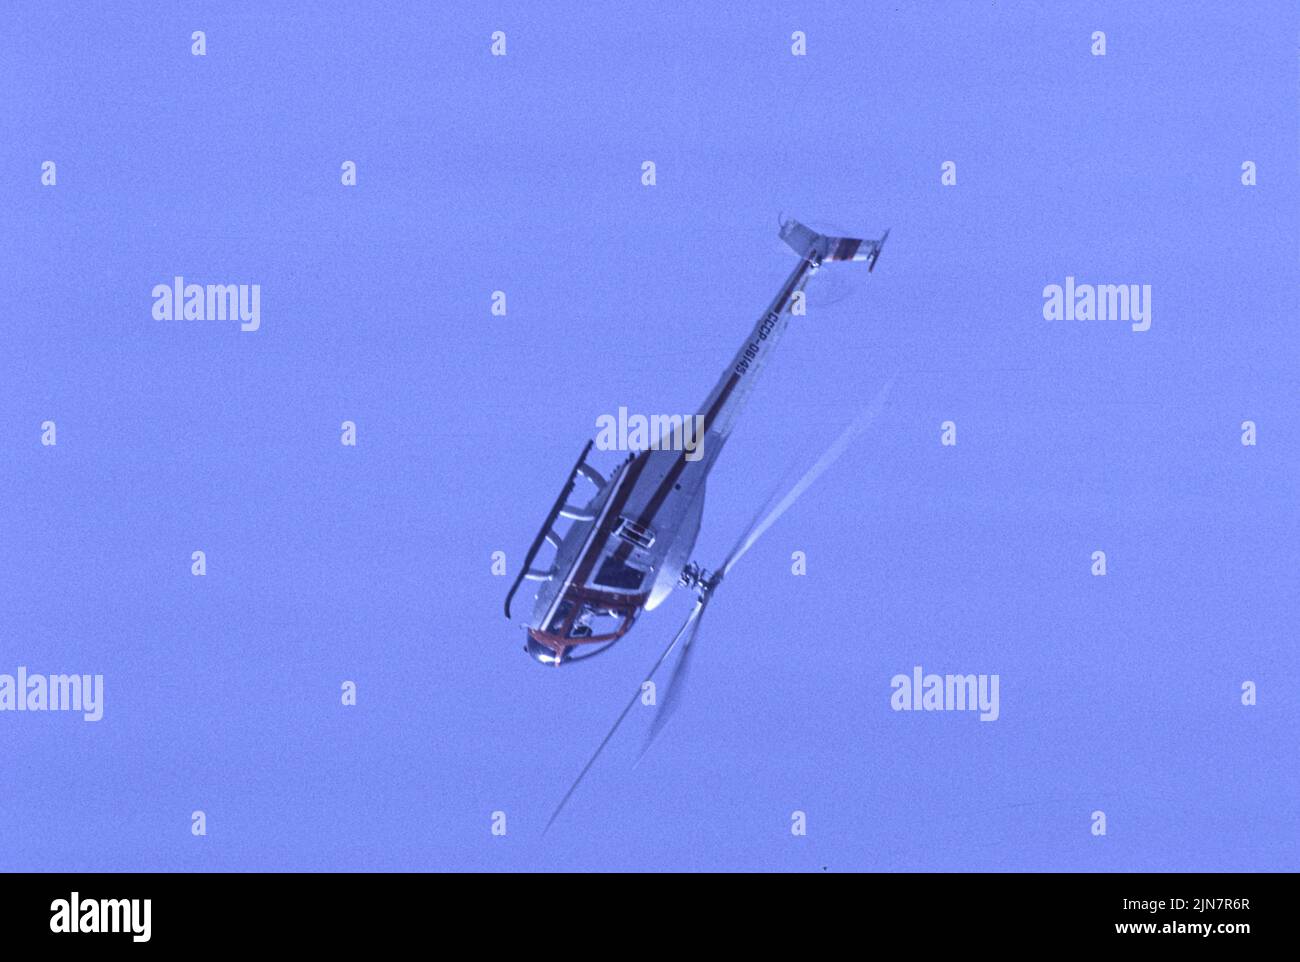 Russian helicopter performing aerobatics at Air Space America 88. Stock Photo